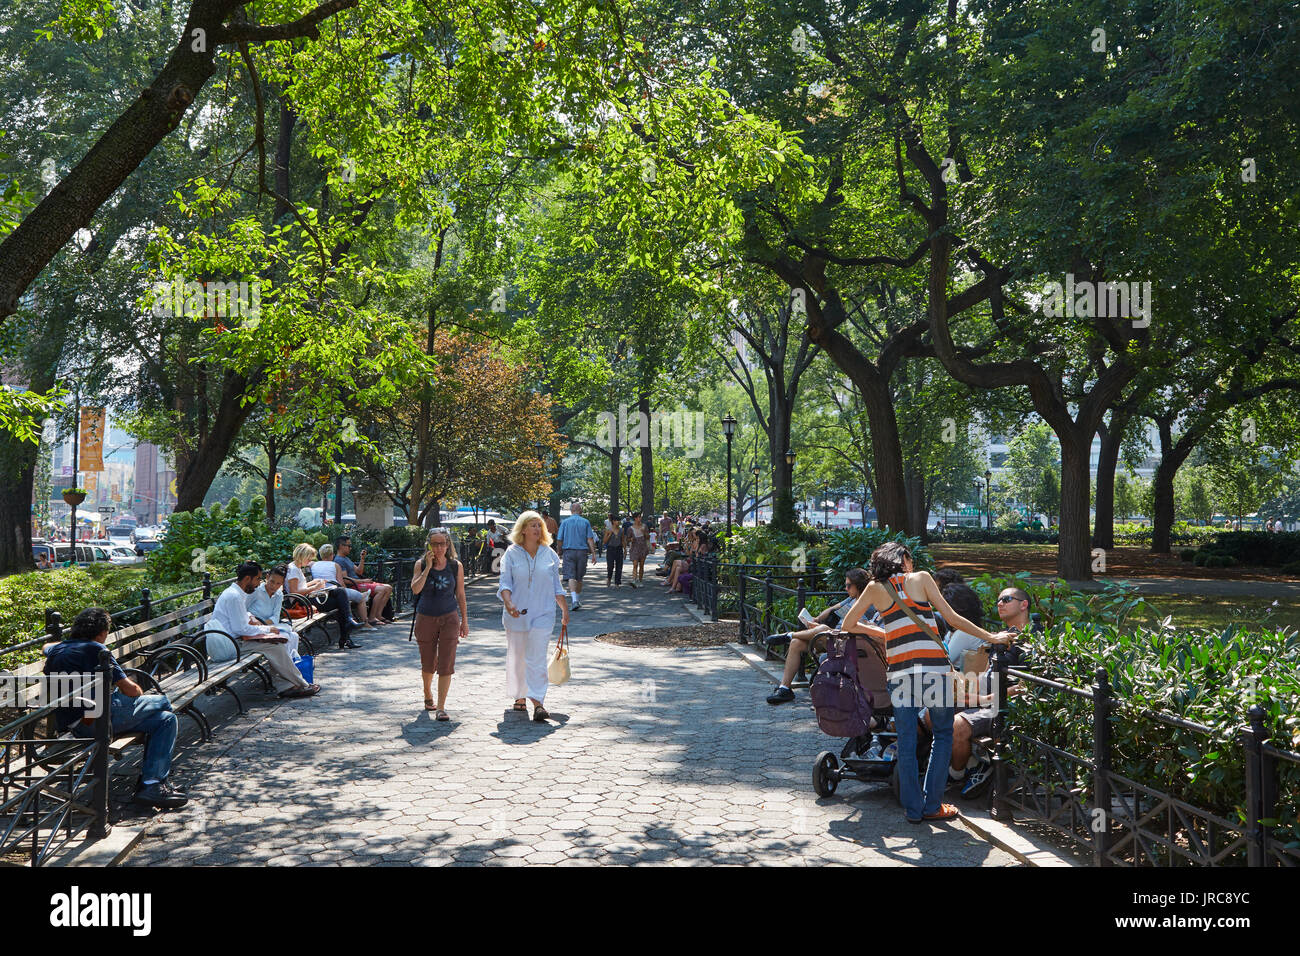 Union Square garden with people walking and sitting on benches in a sunny day in New York Stock Photo